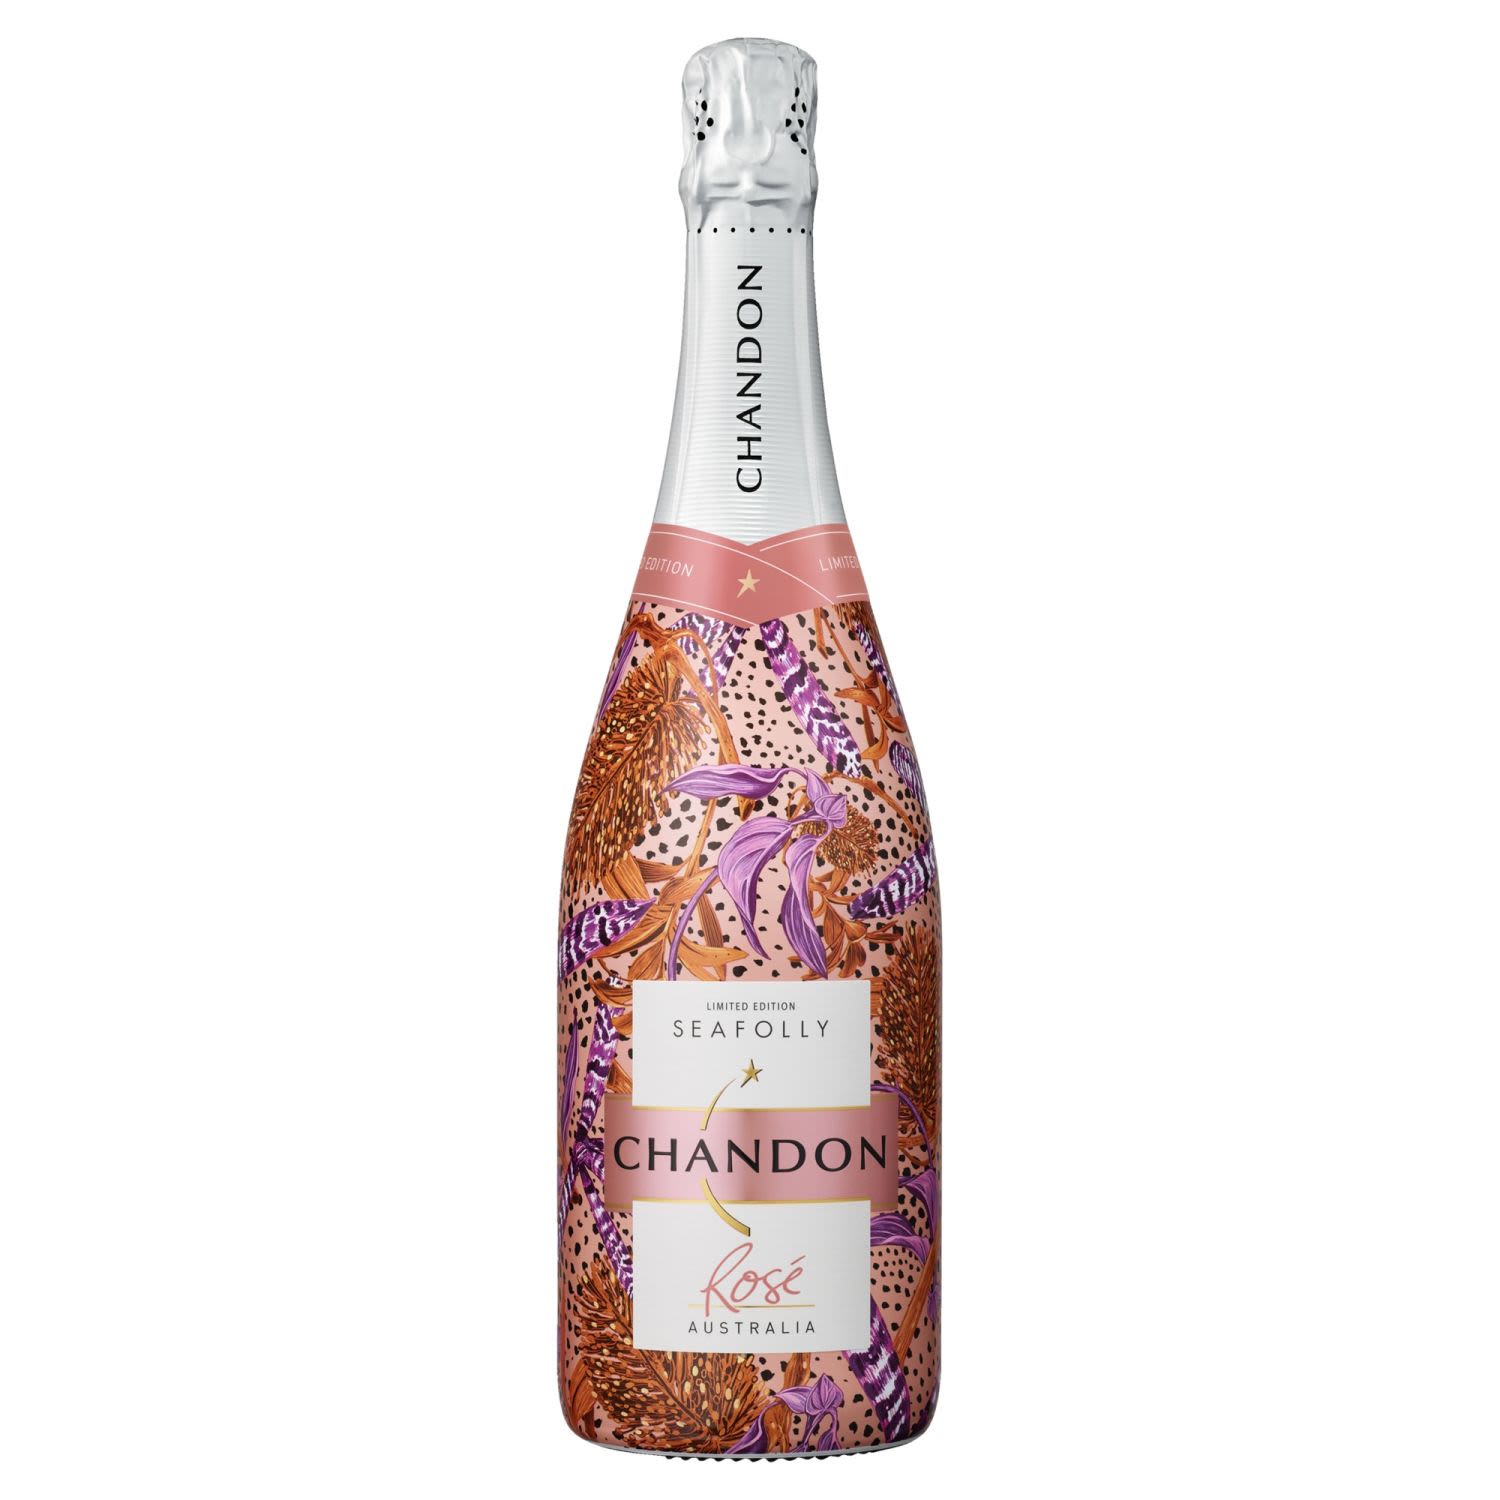 Chandon Brut Rose x Seafolly Limited Edition NV 750mL Bottle